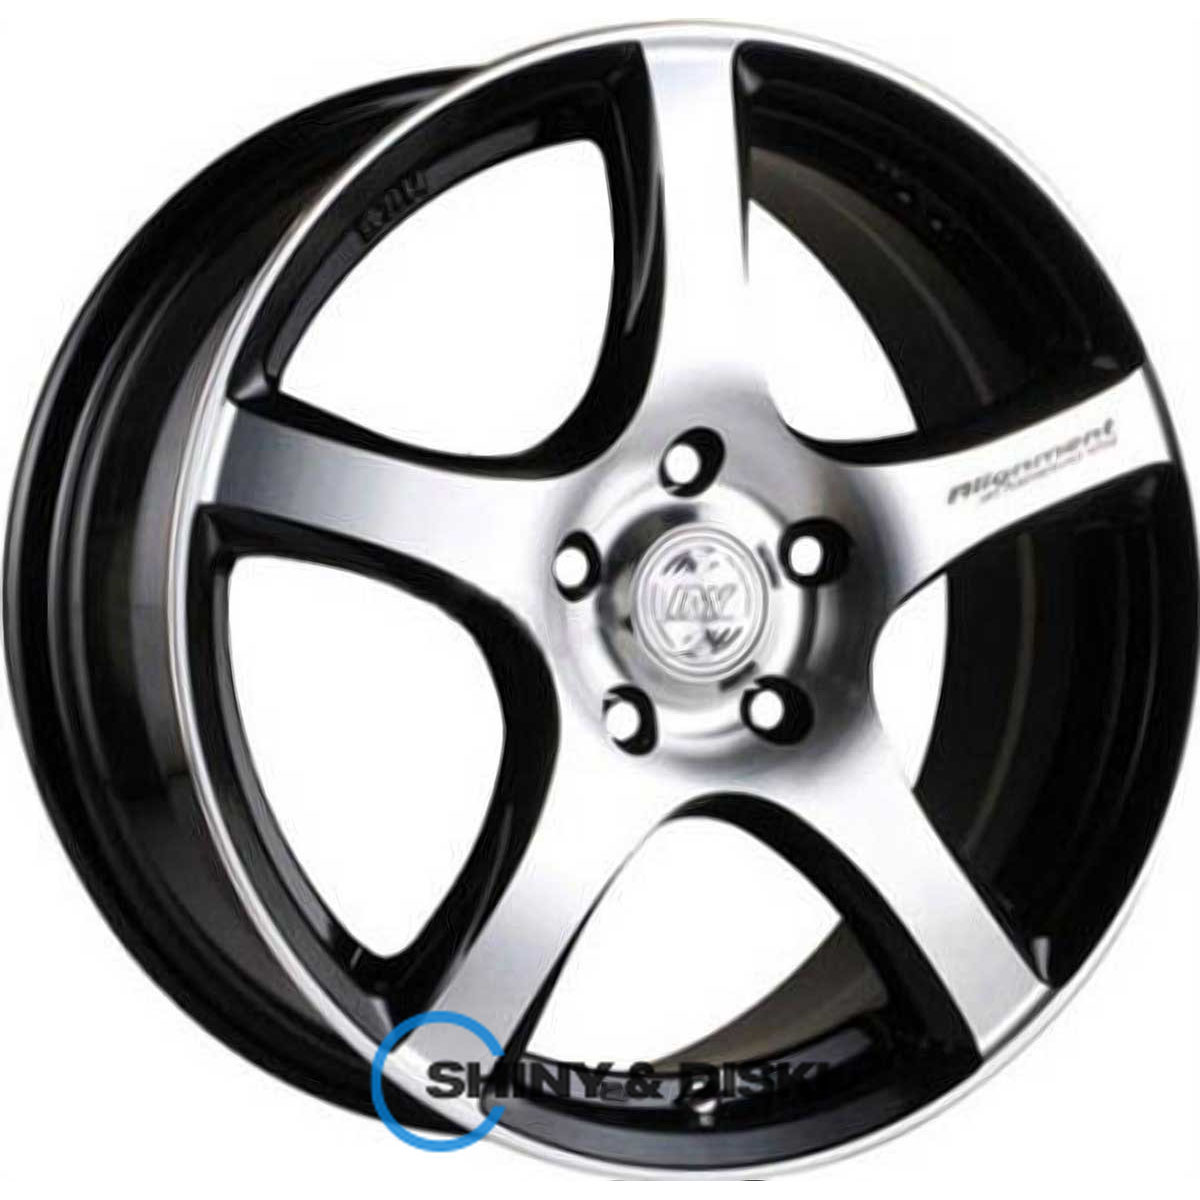 rs tuning h-531 bkfp r15 w6.5 pcd5x112 et40 dia57.1